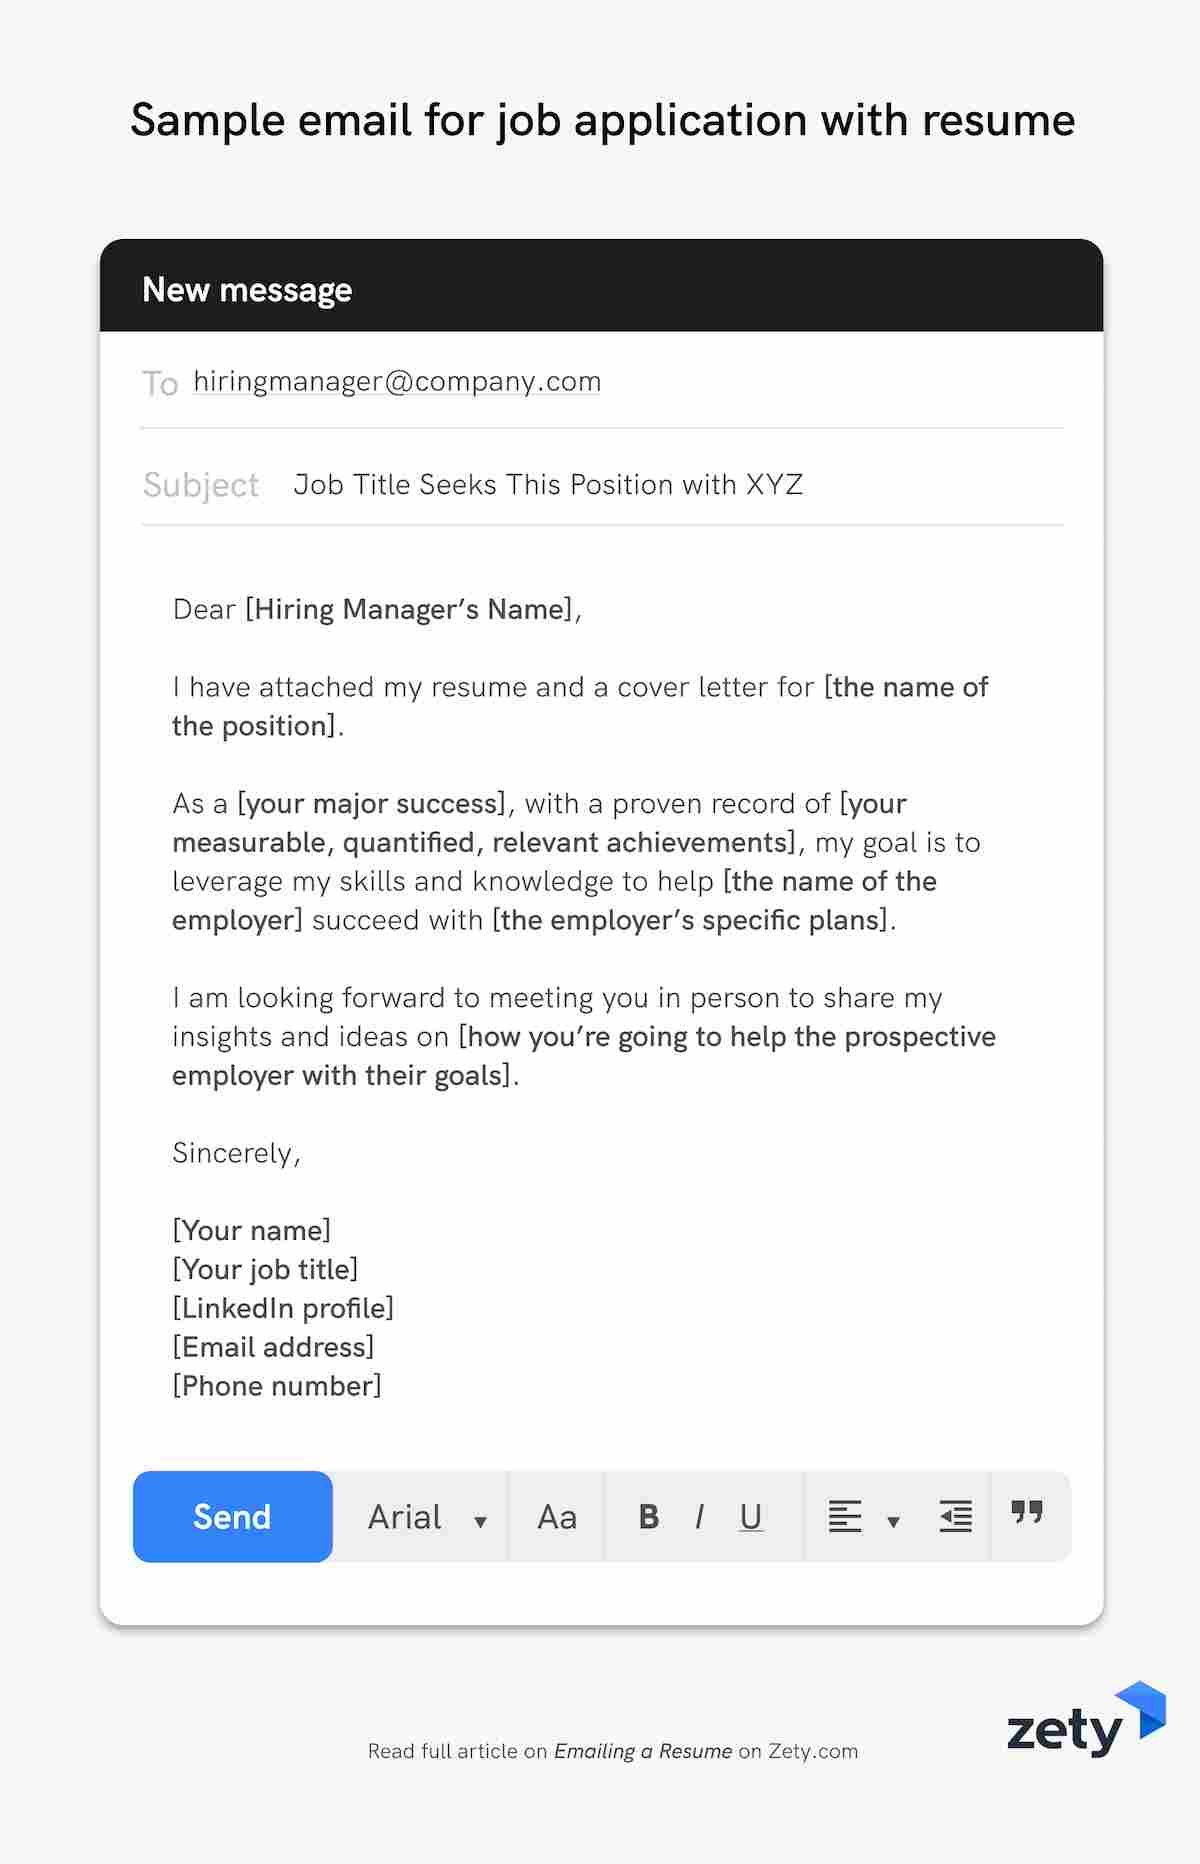 How to Email a Resume and Cover Letter to an Employer